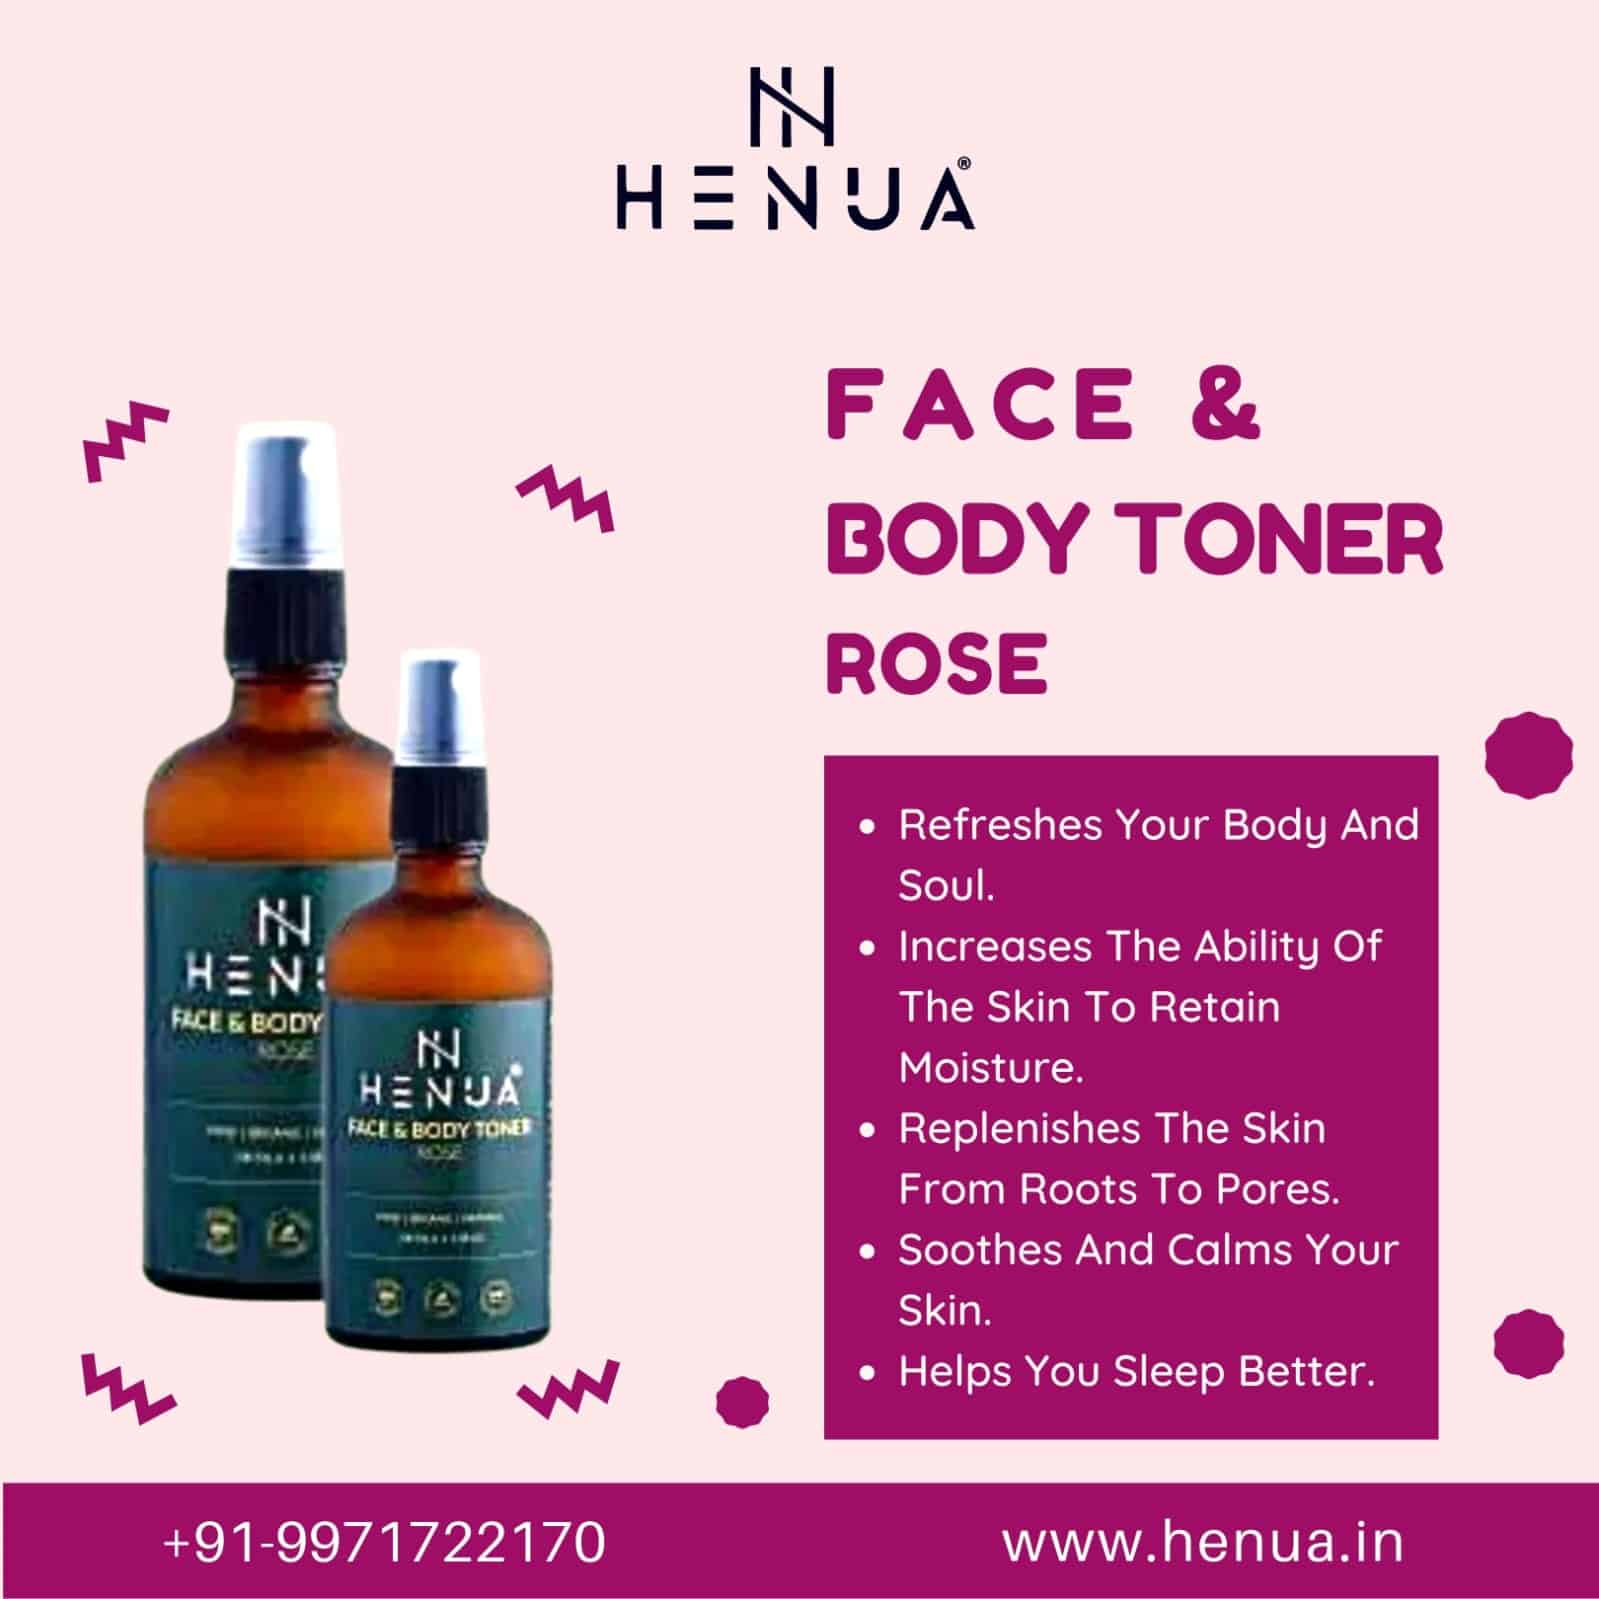 Use-Rose-Face-And-Body-Toner-From-Henua